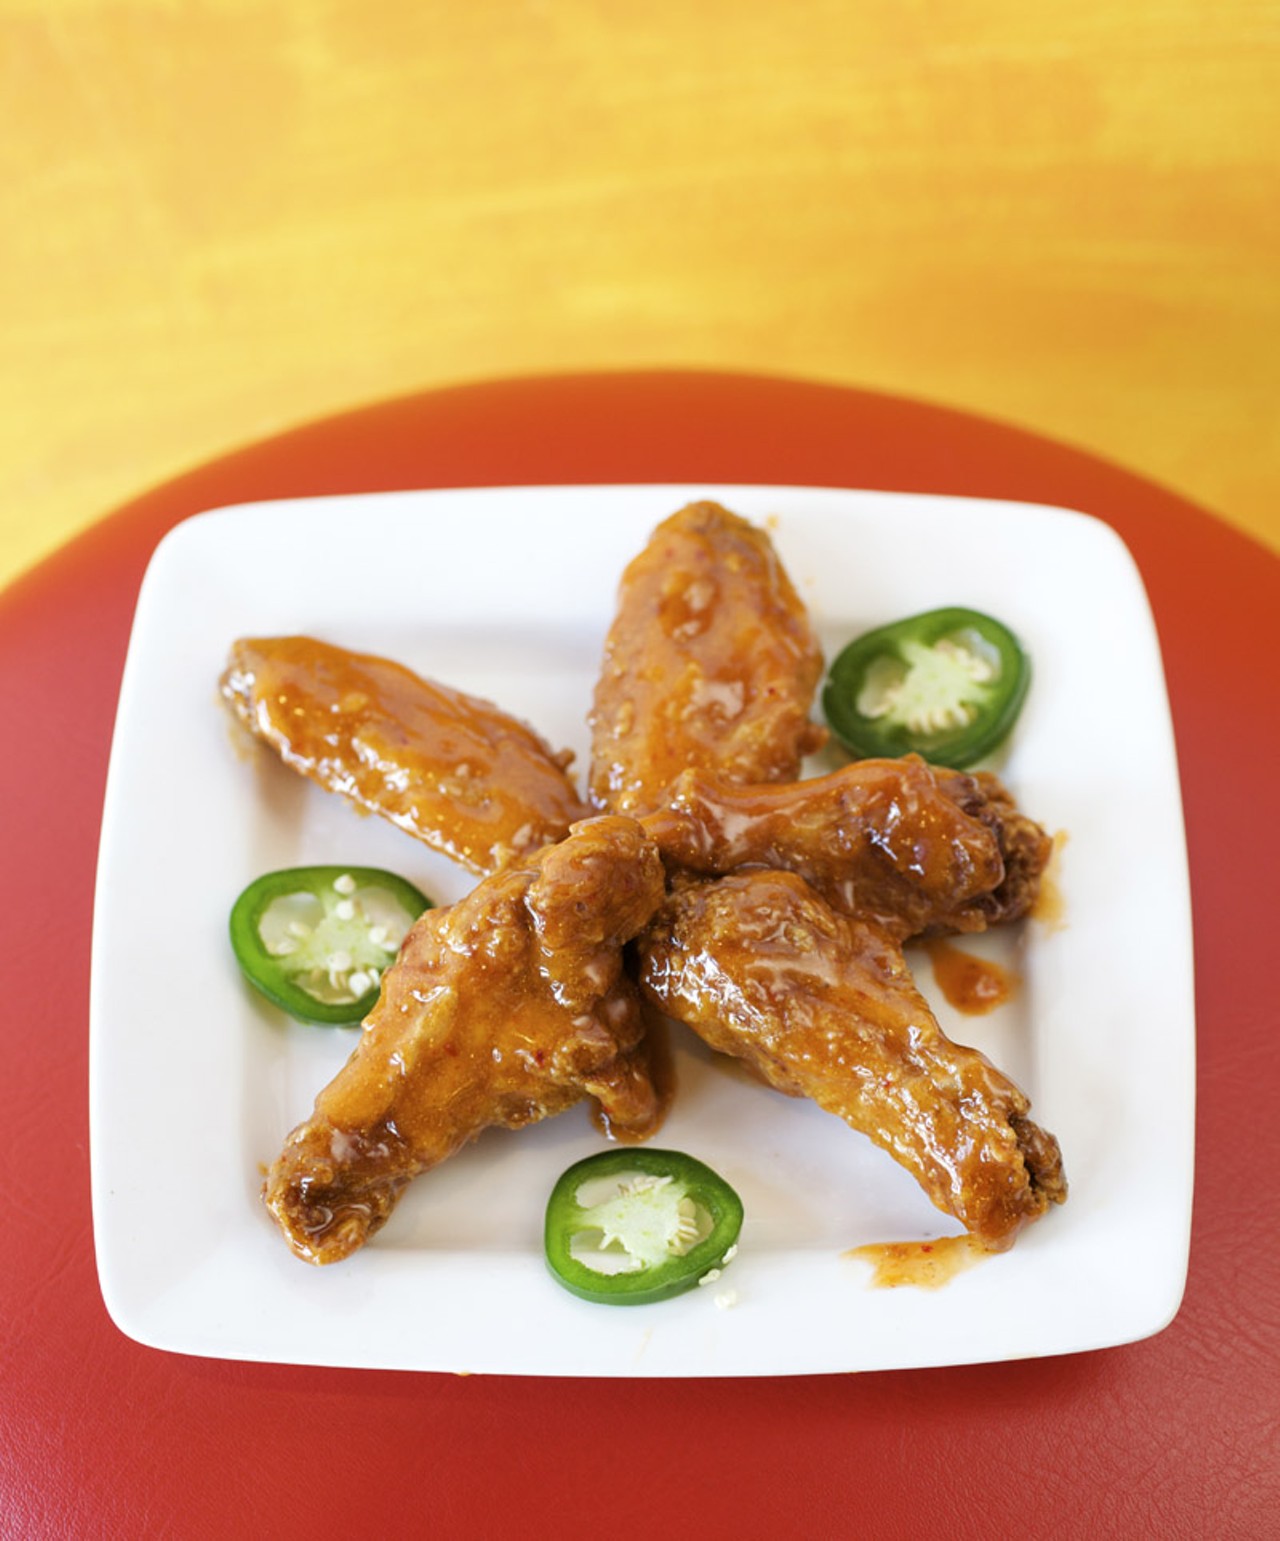 The Hot Mama! is a blend of honey and hot chili coated wings.